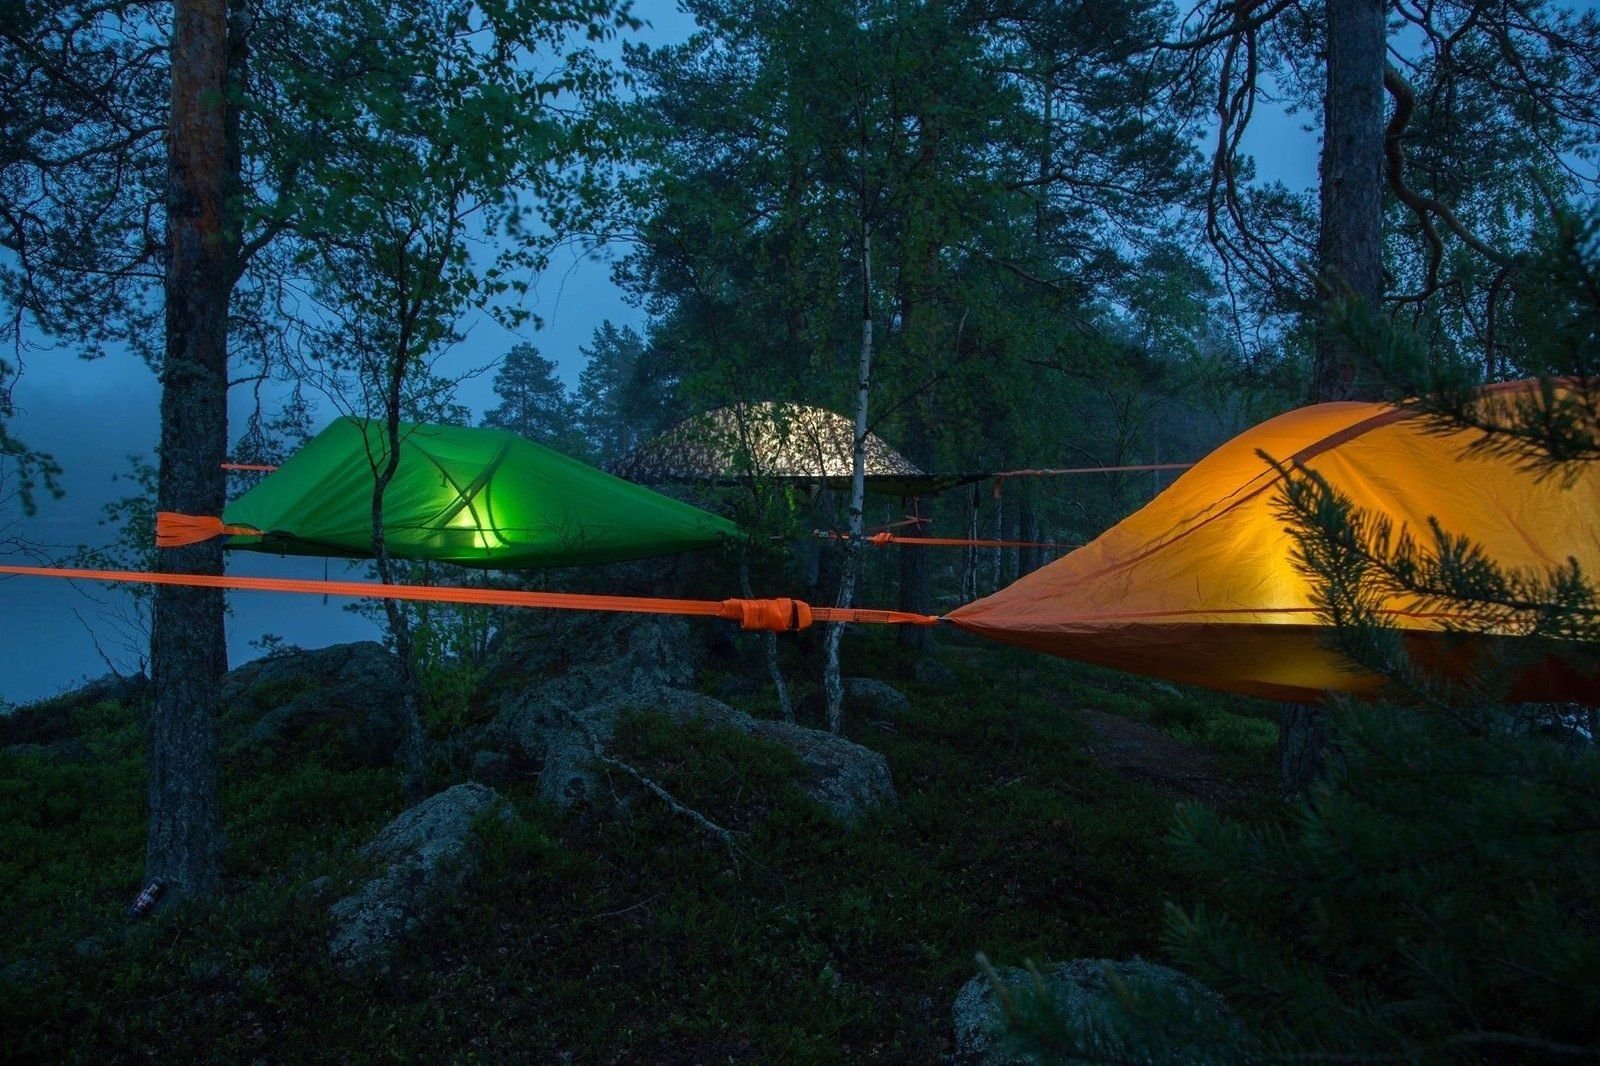 Wild camping in tree tents